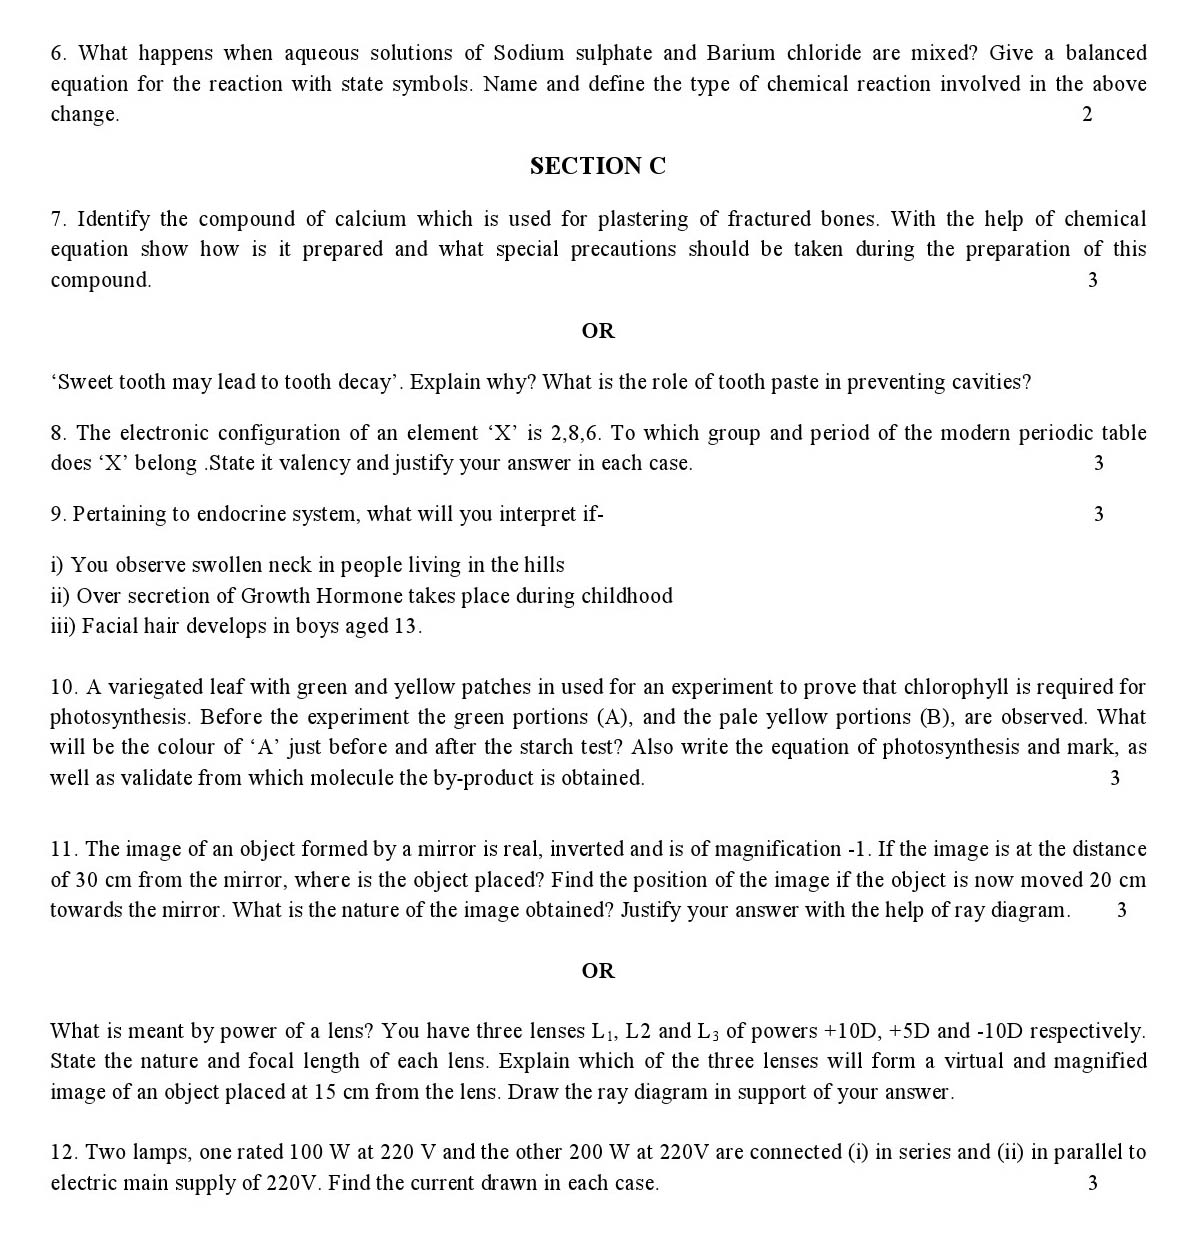 Science CBSE Class X Sample Question Paper 2018-19 - Image 2